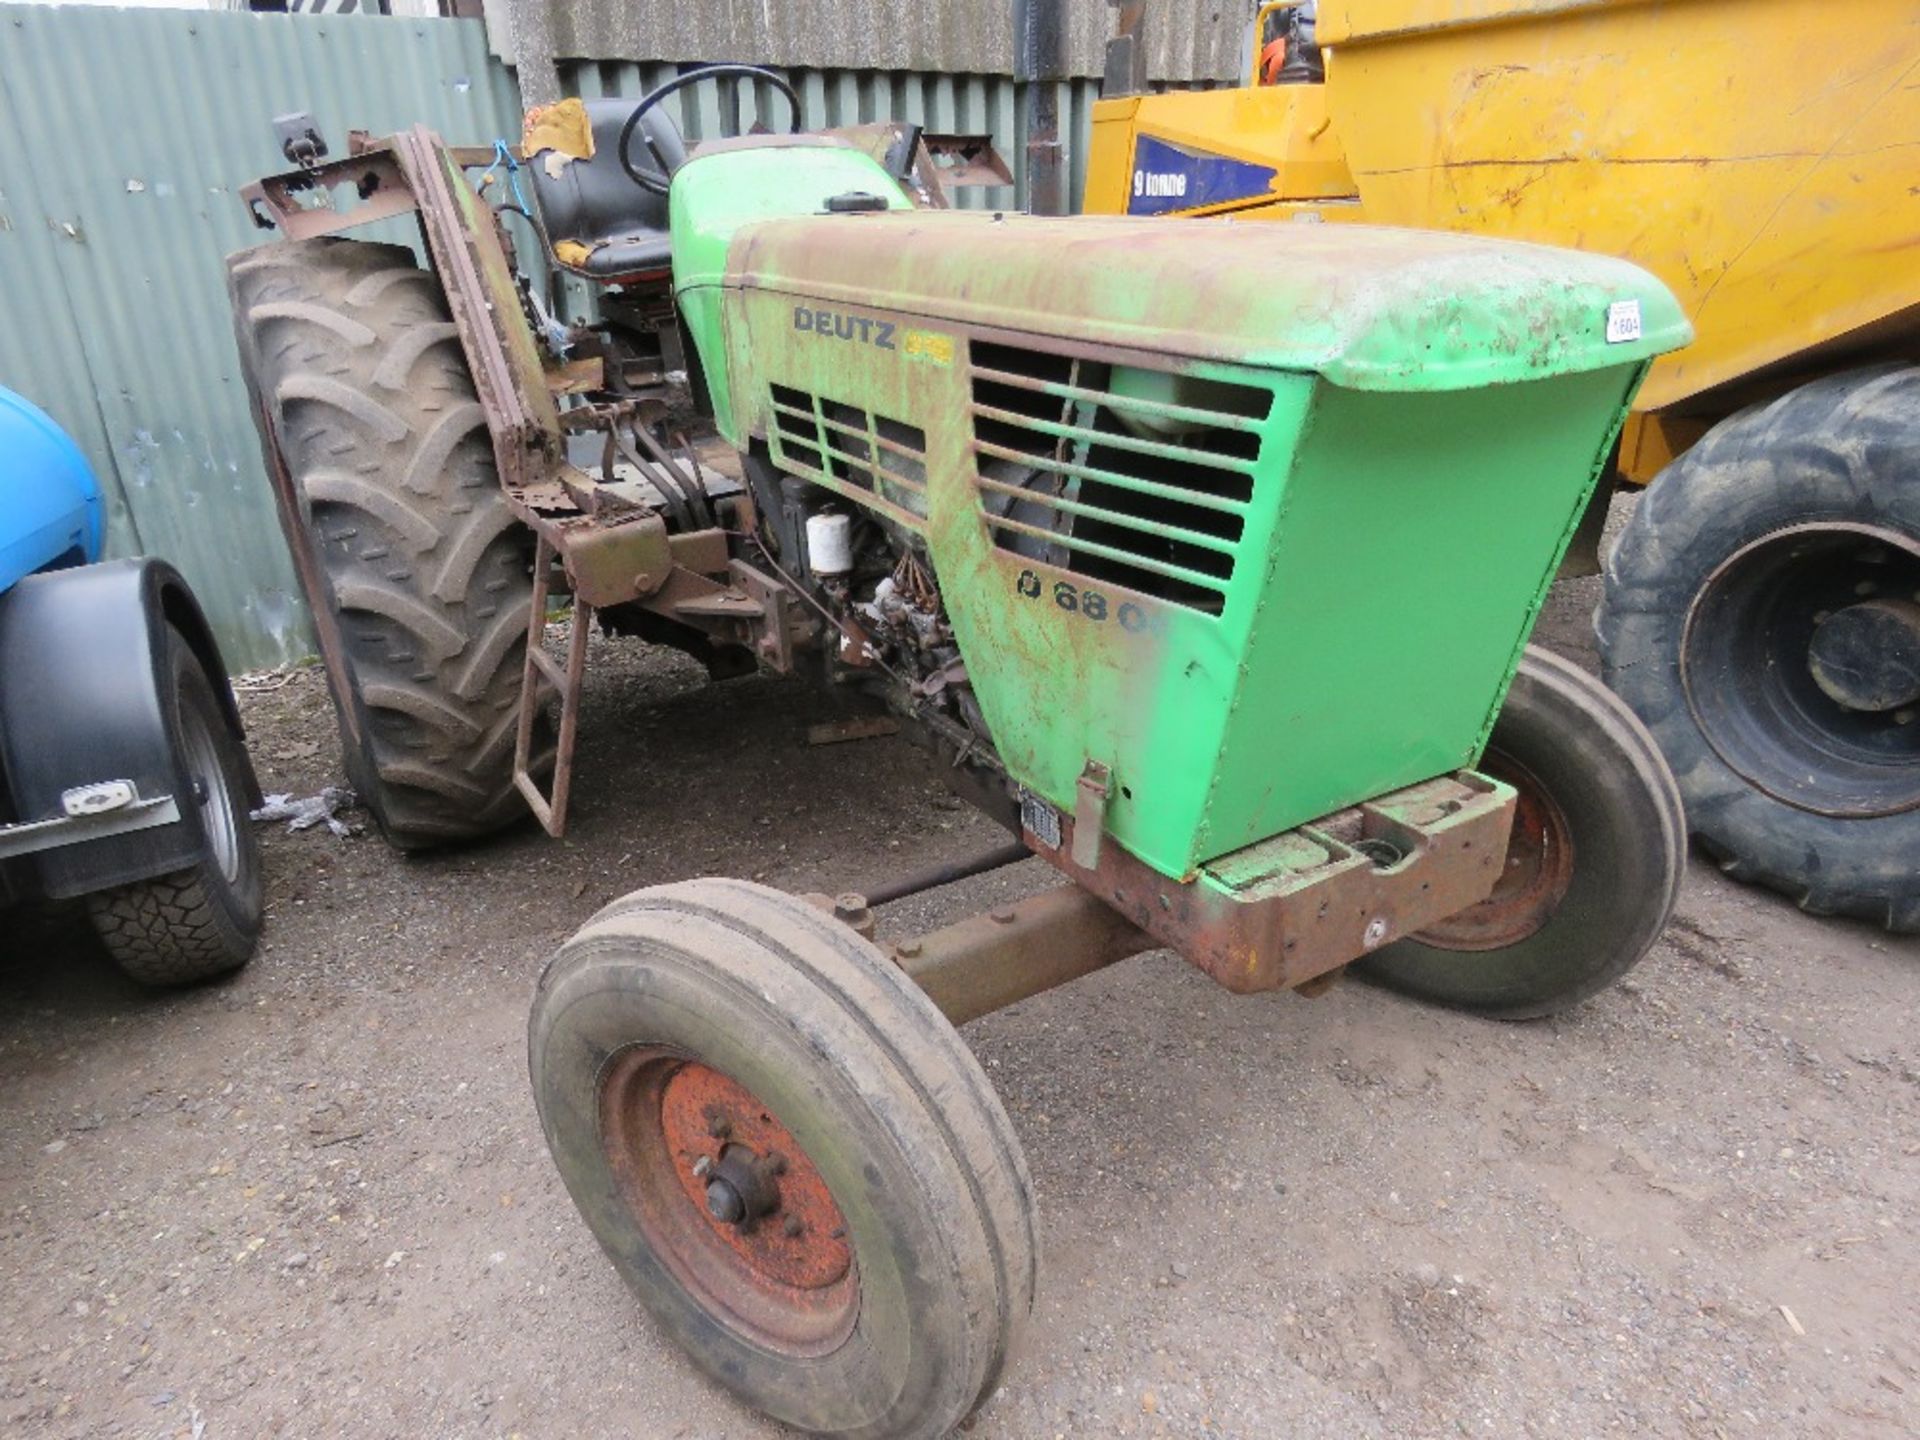 DEUTZ D6806 2WD AGRICULTURAL TRACTOR. WHEN TESTEDW AS SEEN TO DRIVE, STEER AND BRAKE, PTO TURNED AND